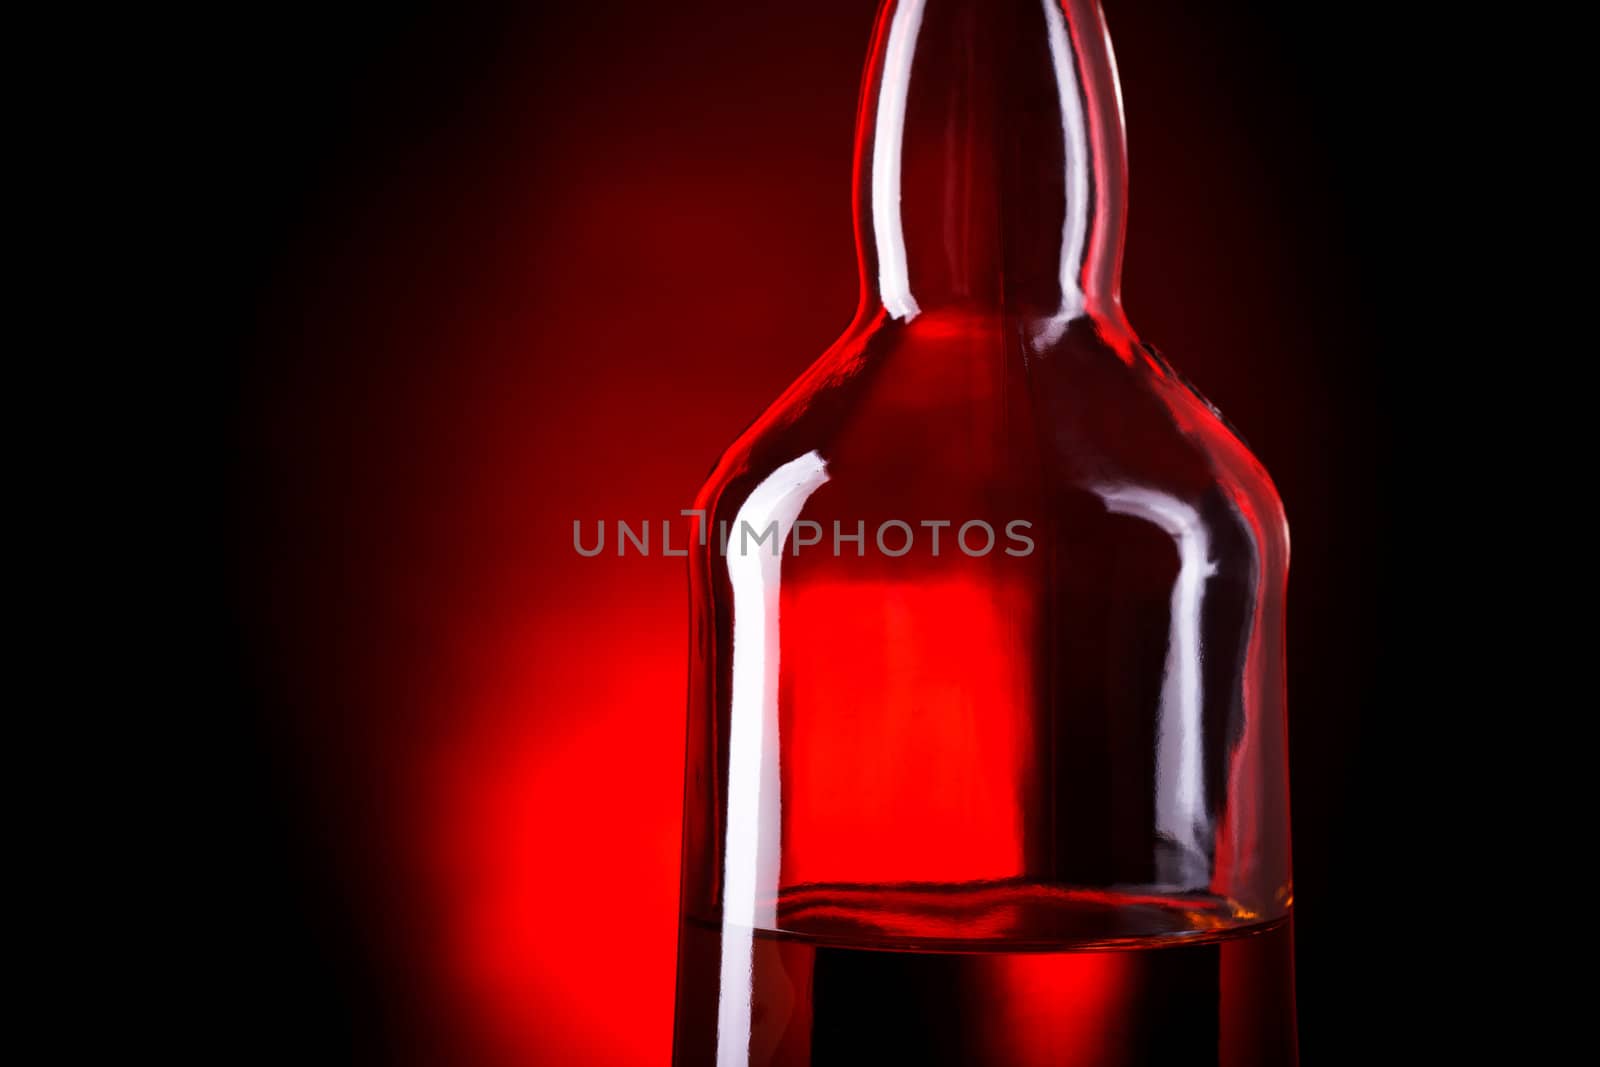 bottle of whiskey on deep red background